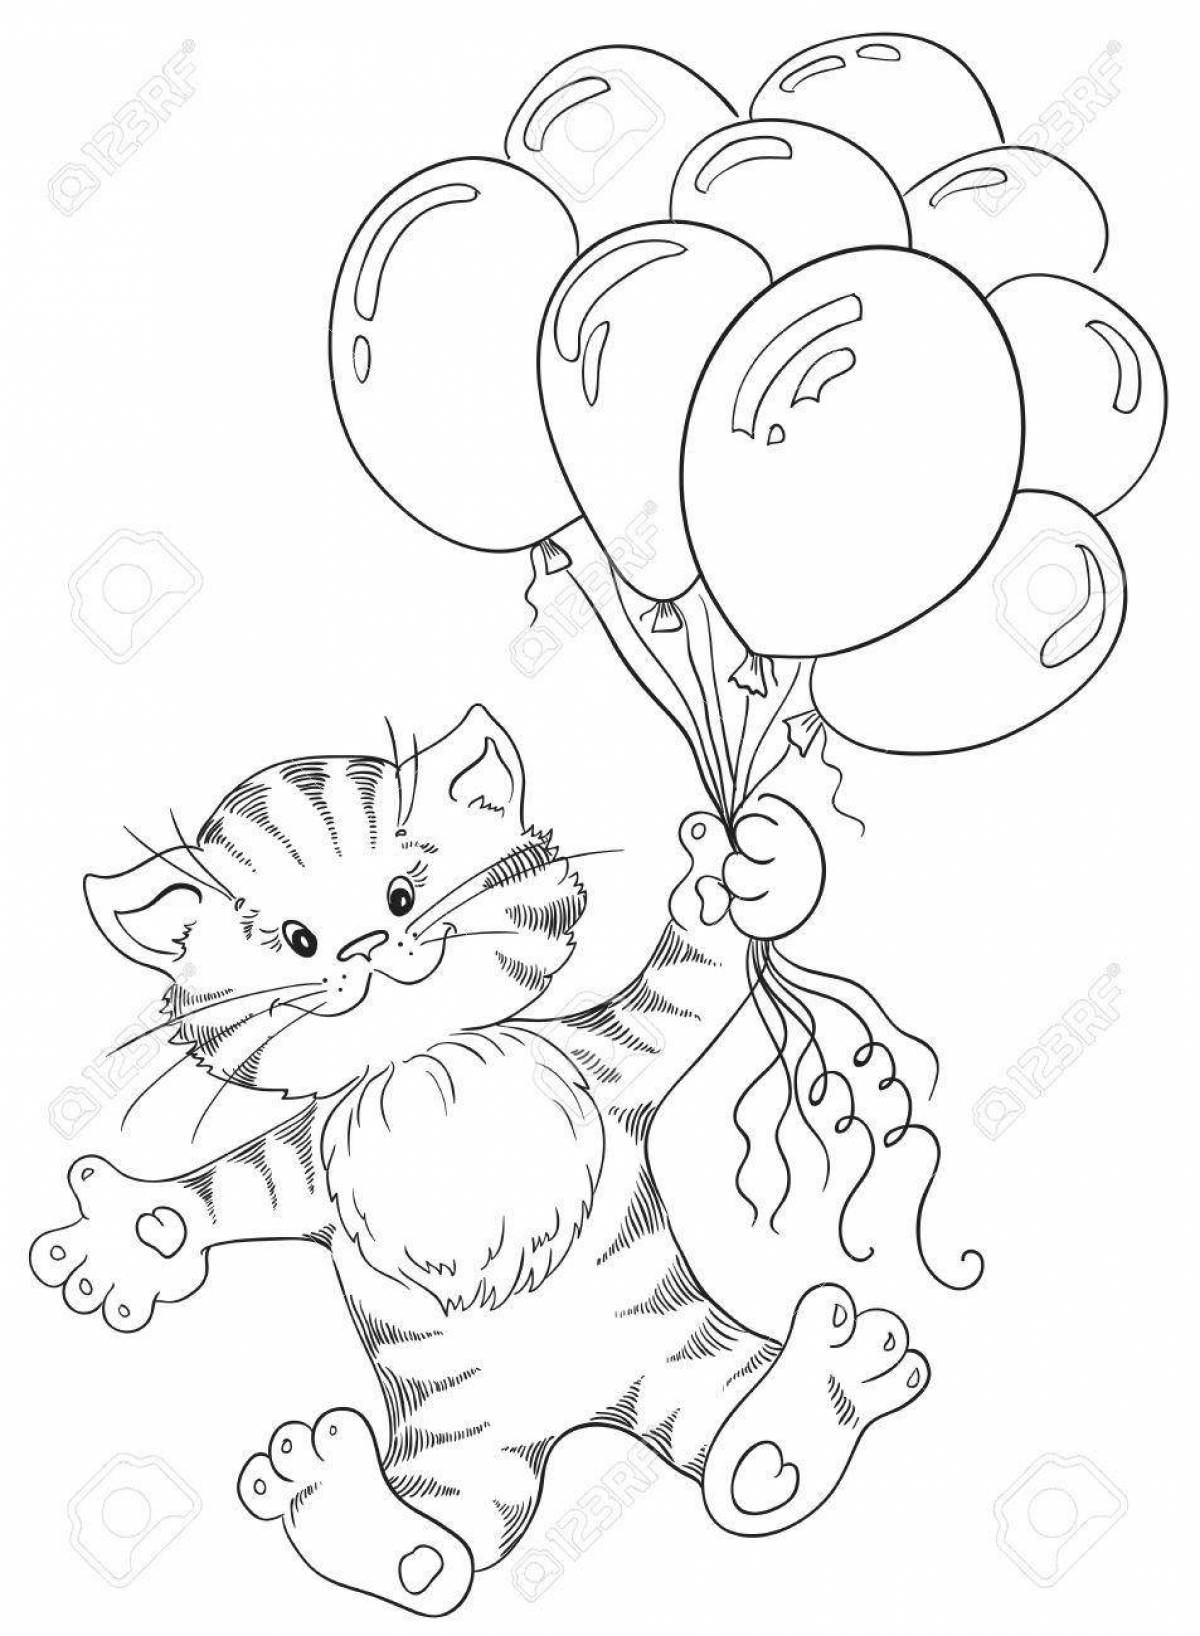 Cat with balloons #3